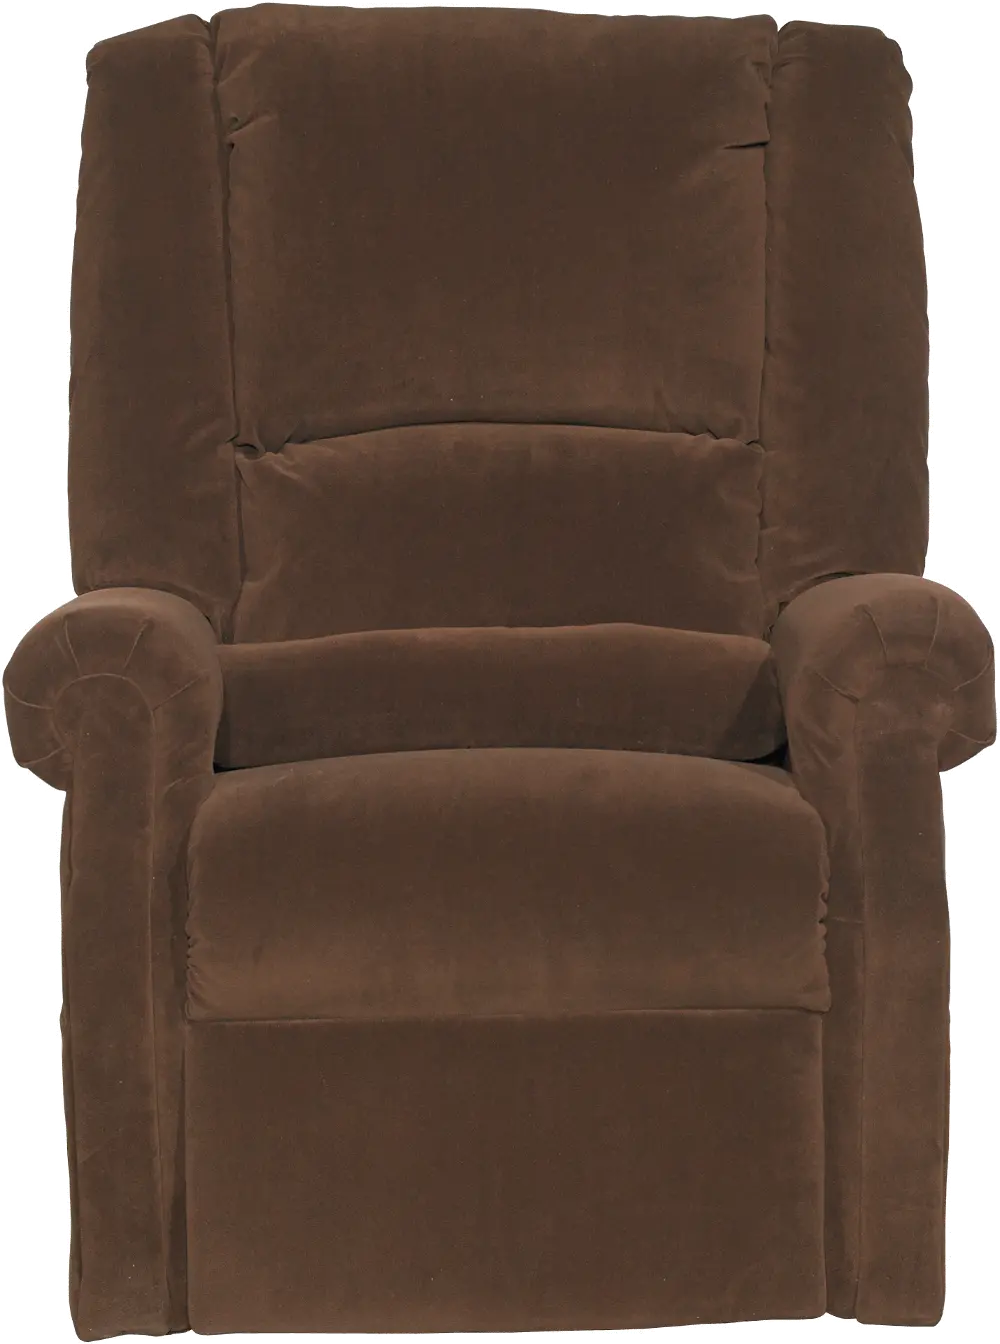 Sable Brown Infinite Position Lift Chair - Henry-1